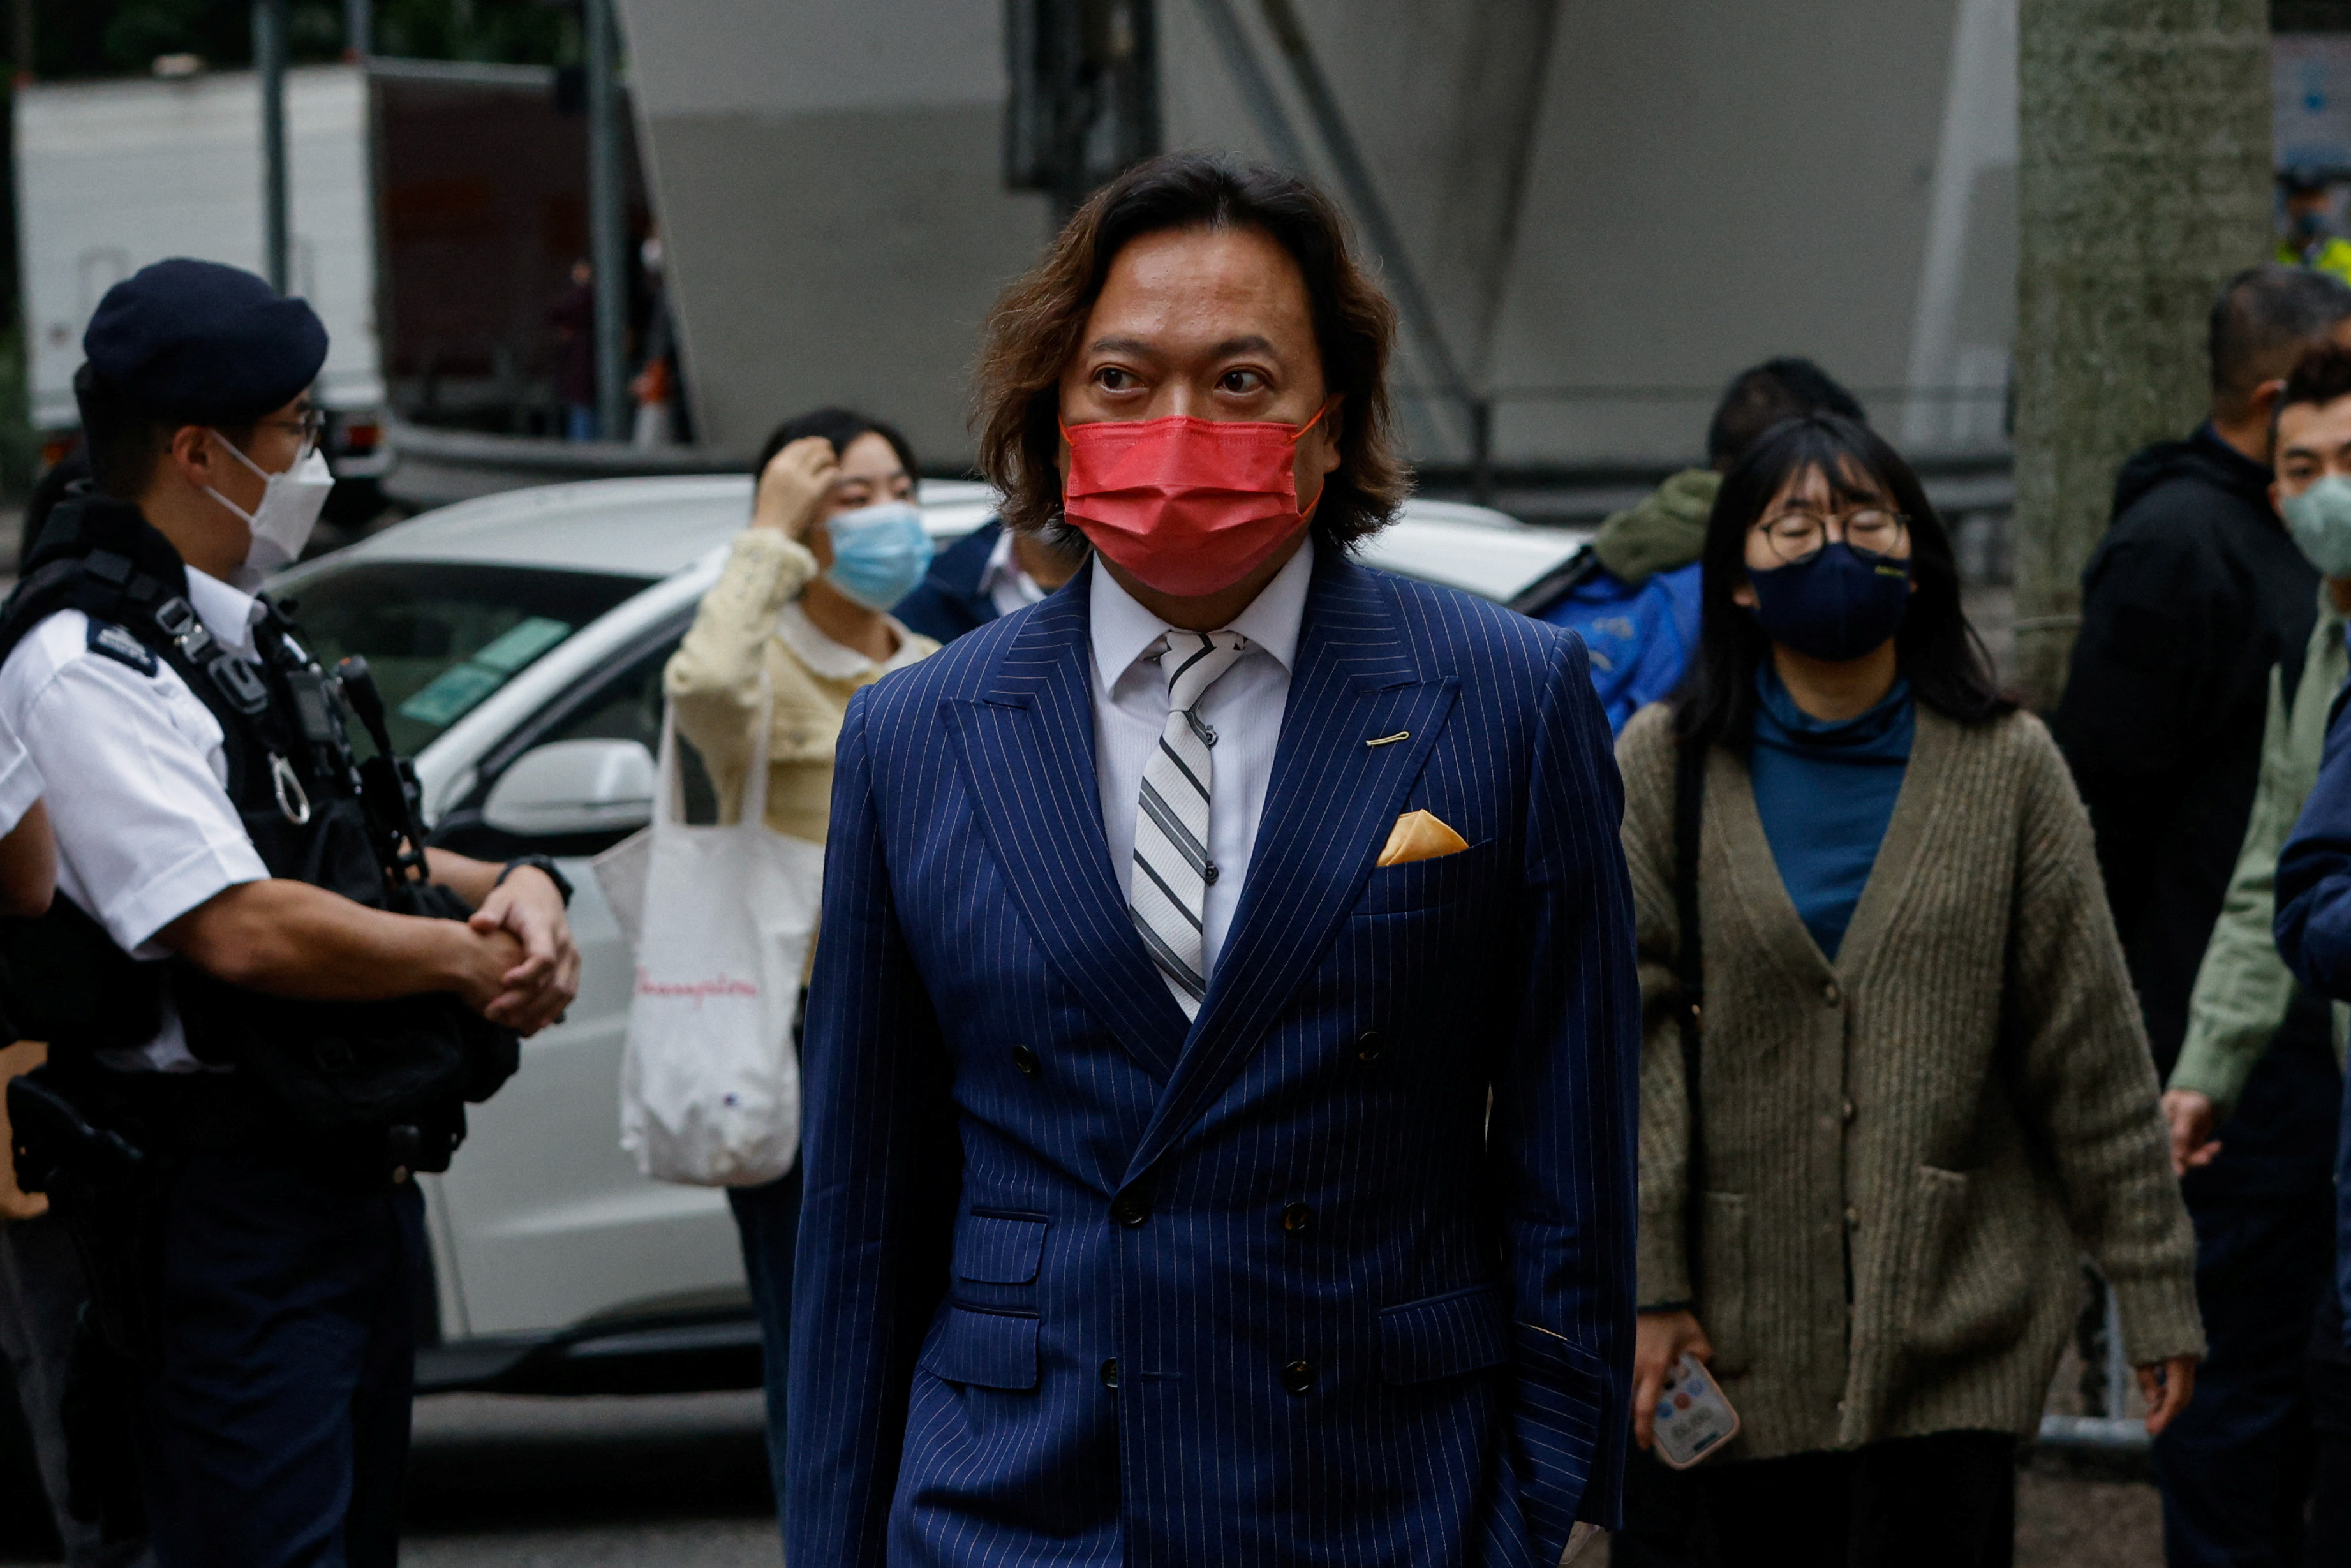 Lau Wai-Chung, one of the 47 pro-democracy activists charged with conspiracy to commit subversion under the national security law, arrives at the West Kowloon Magistrates' Courts building in Hong Kong